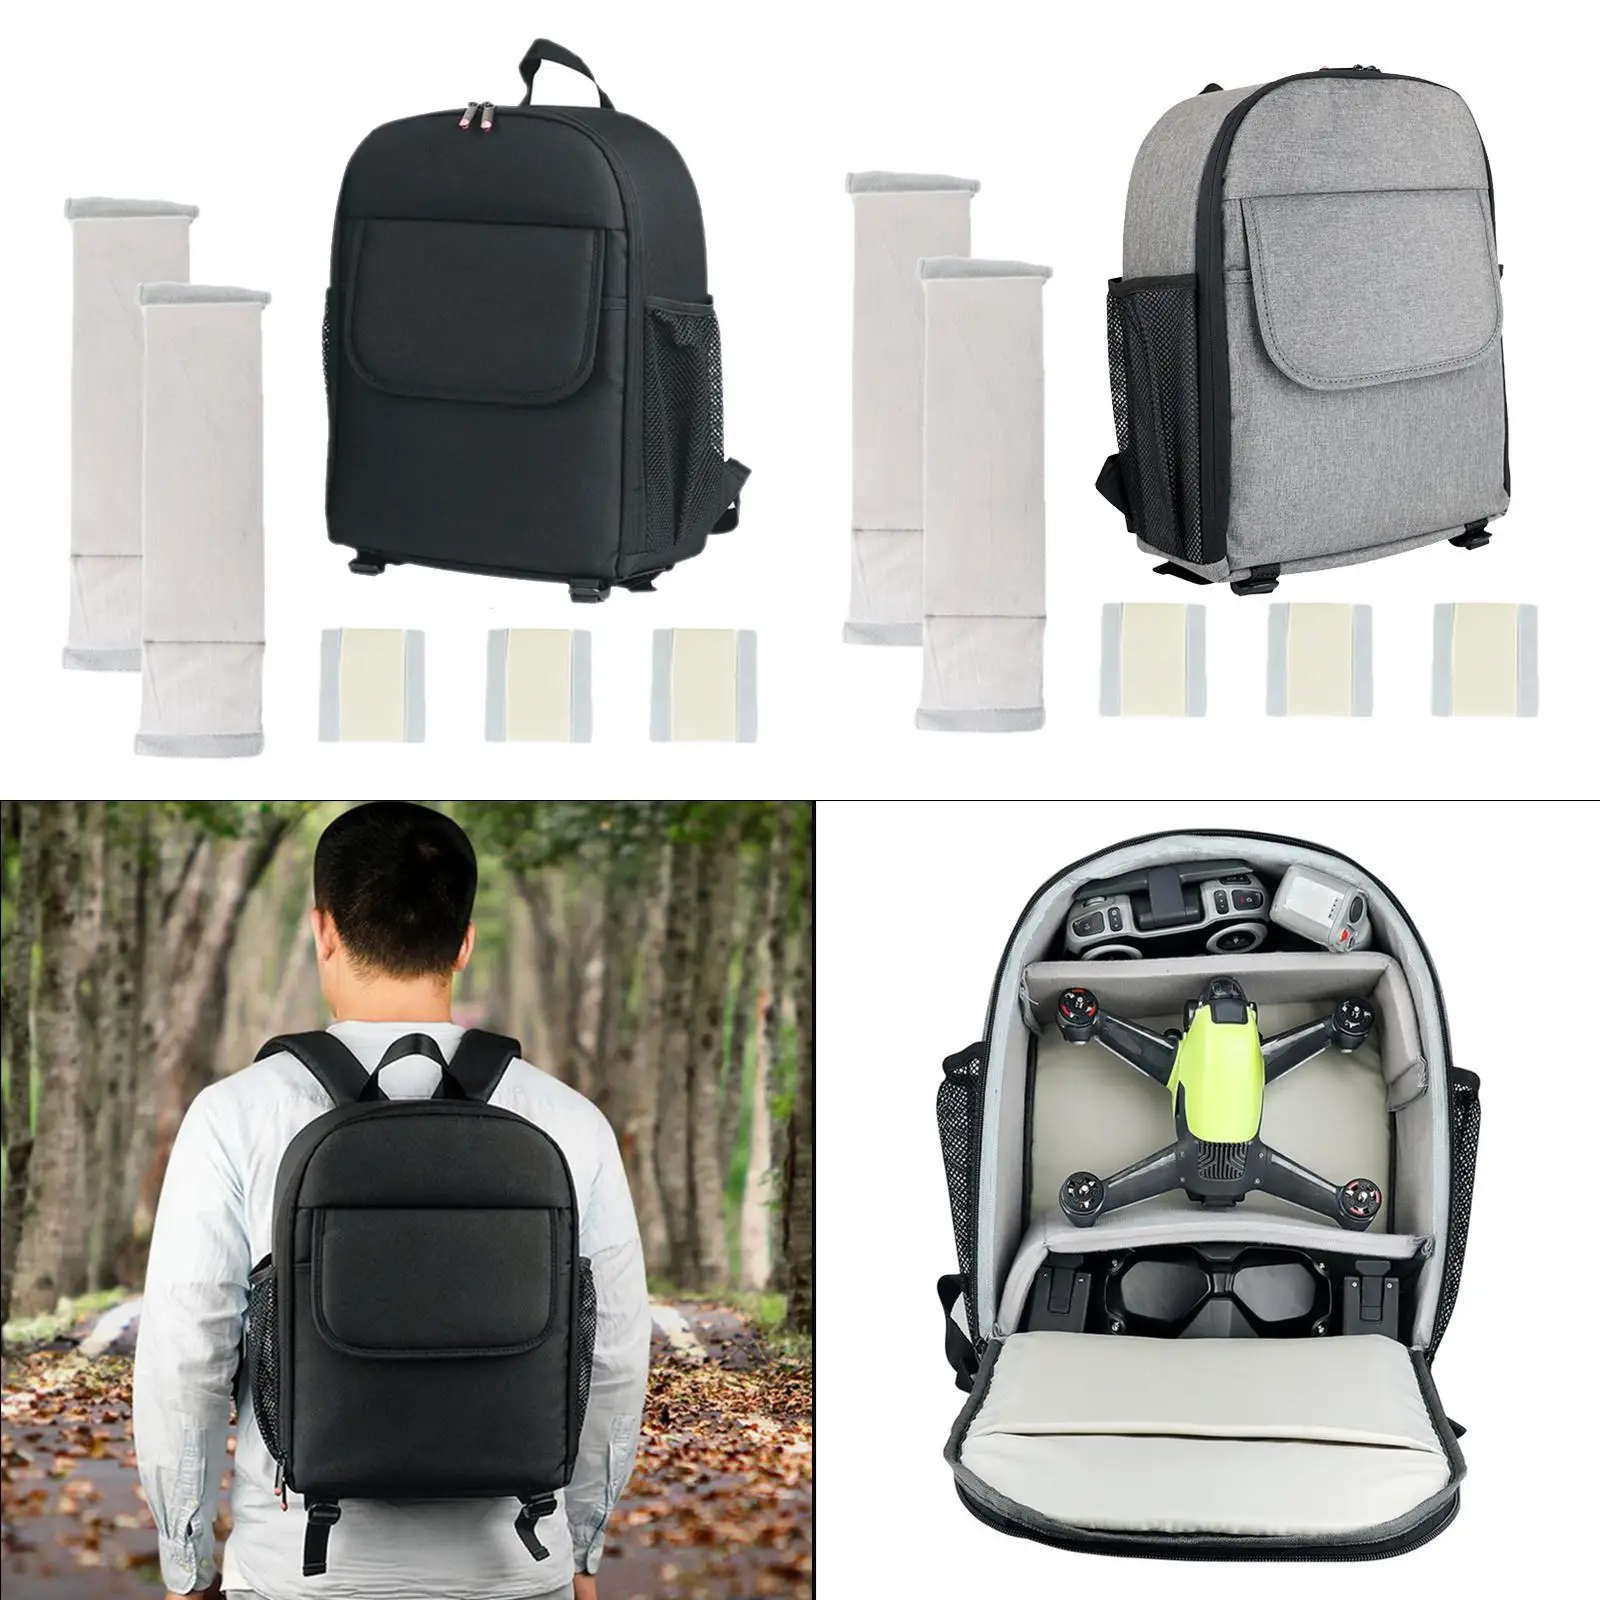 Portable Drone and Accessories Drone Organizer Inner Removable Dividers Carrying Bag Storage Bag Outdoor Carrying Case